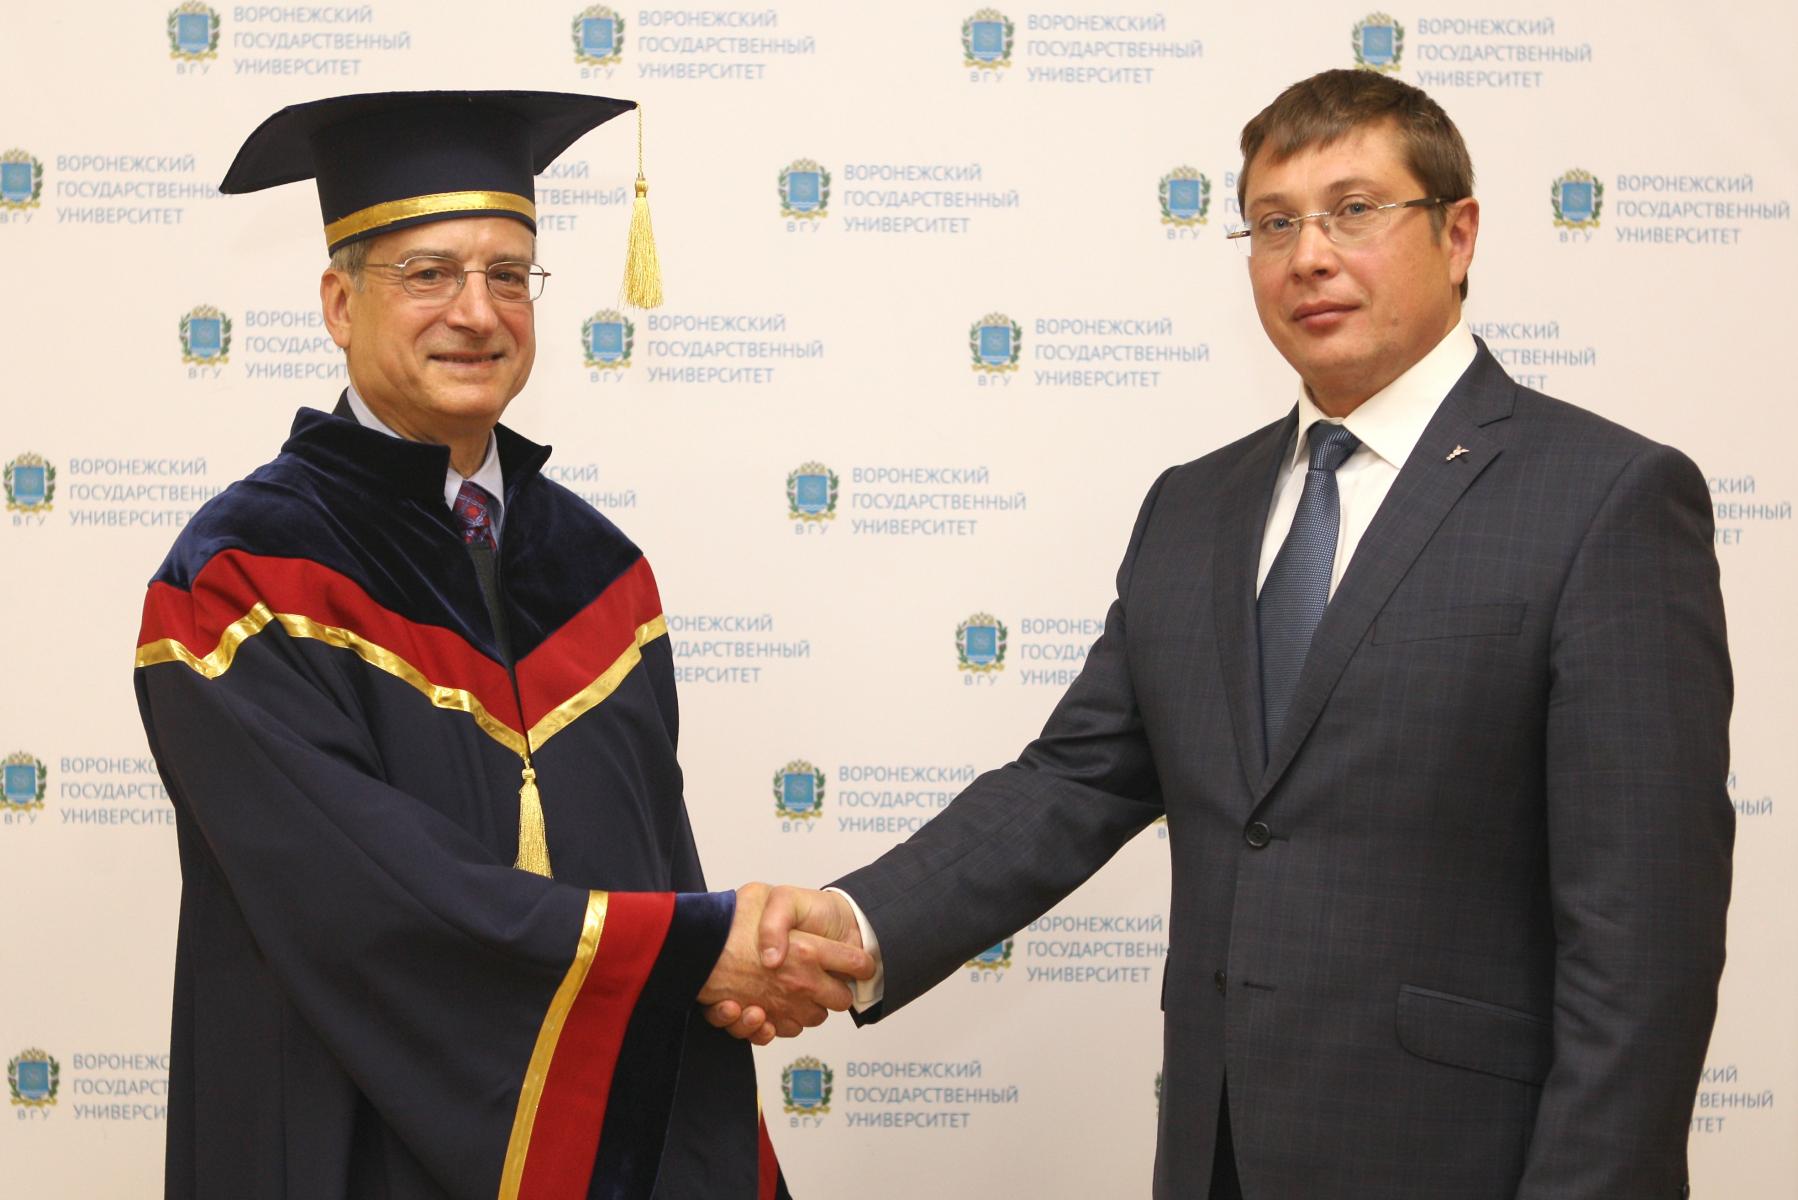 Starace received honorary degree from Russian university